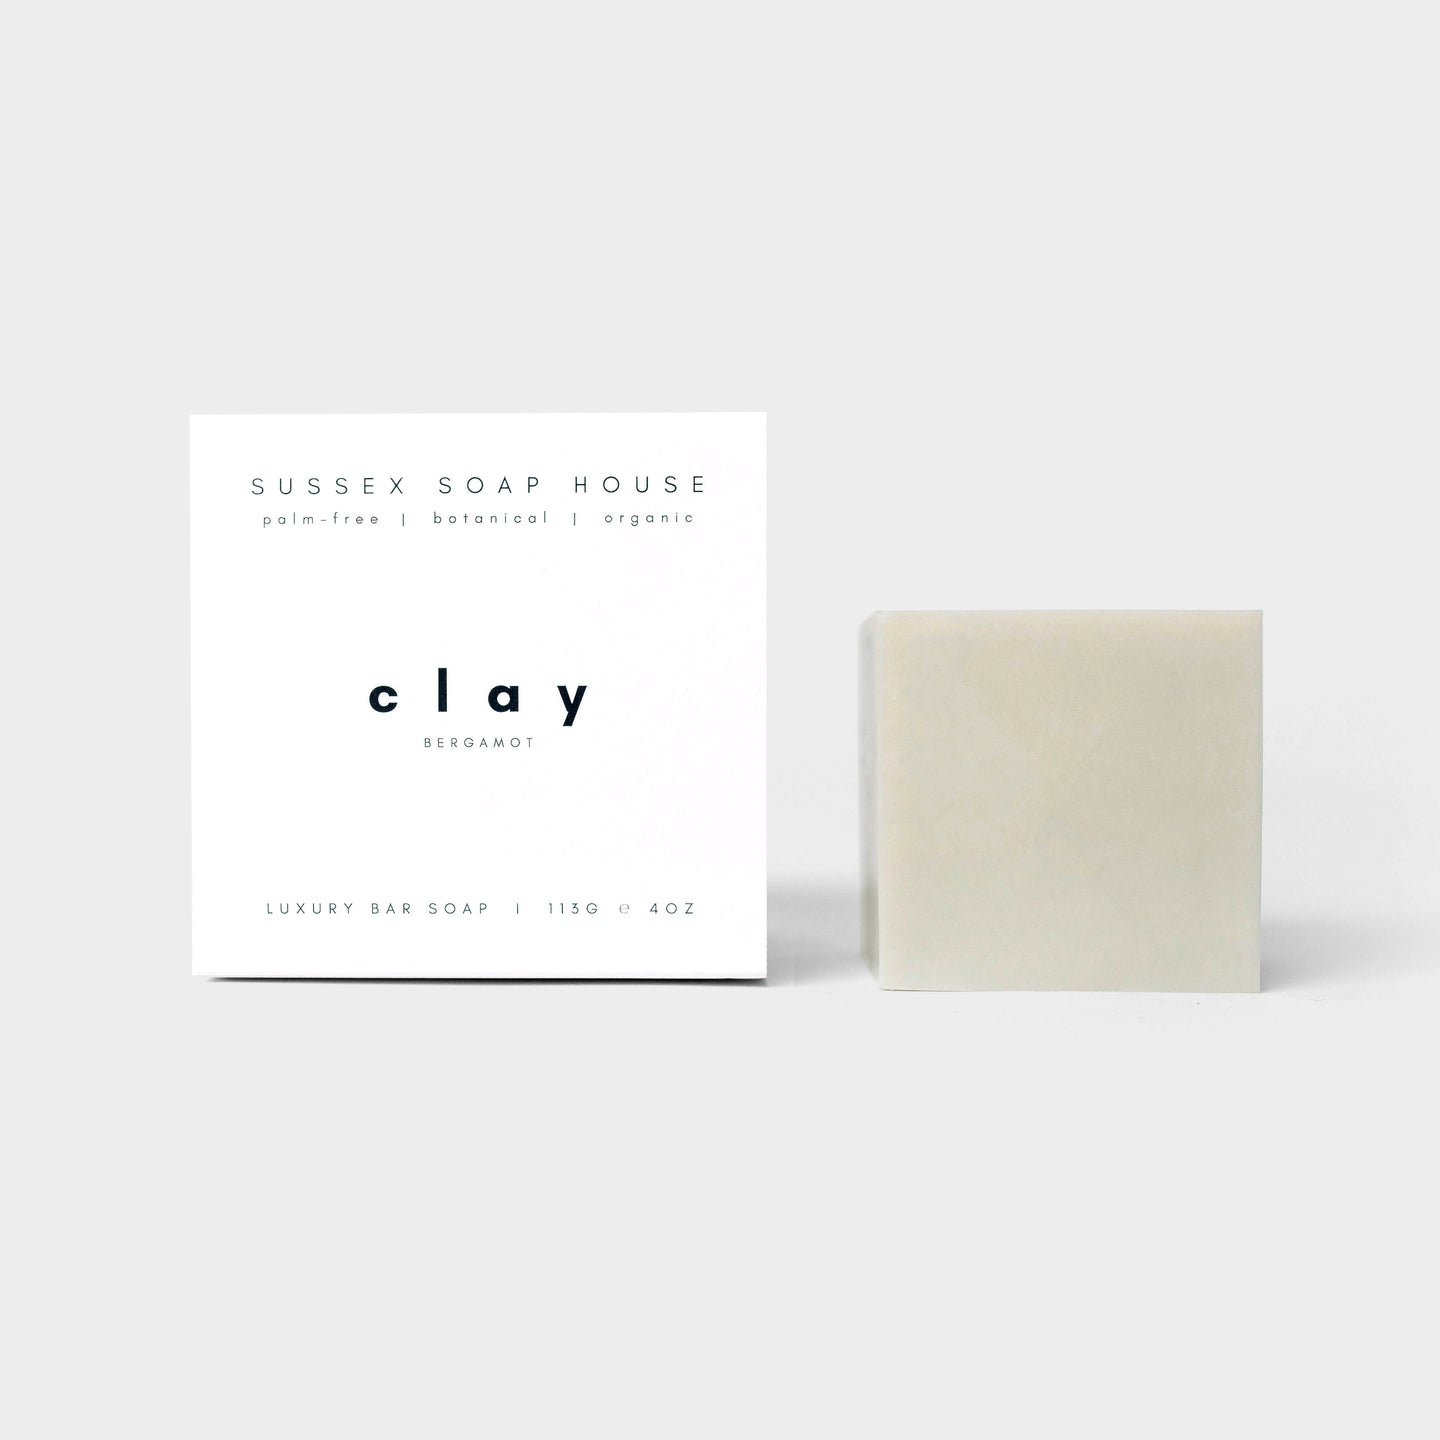 SUSSEX SOAP HOUSE Formulated with mineral-rich clays, nourishing organic plant oils & a cleansing citrus blend of bergamot, lemon, & rosemary essential oils, our gently exfoliating clay bar draws impurities, tones & clarifies the skin with a fresh and fragrant lather cube